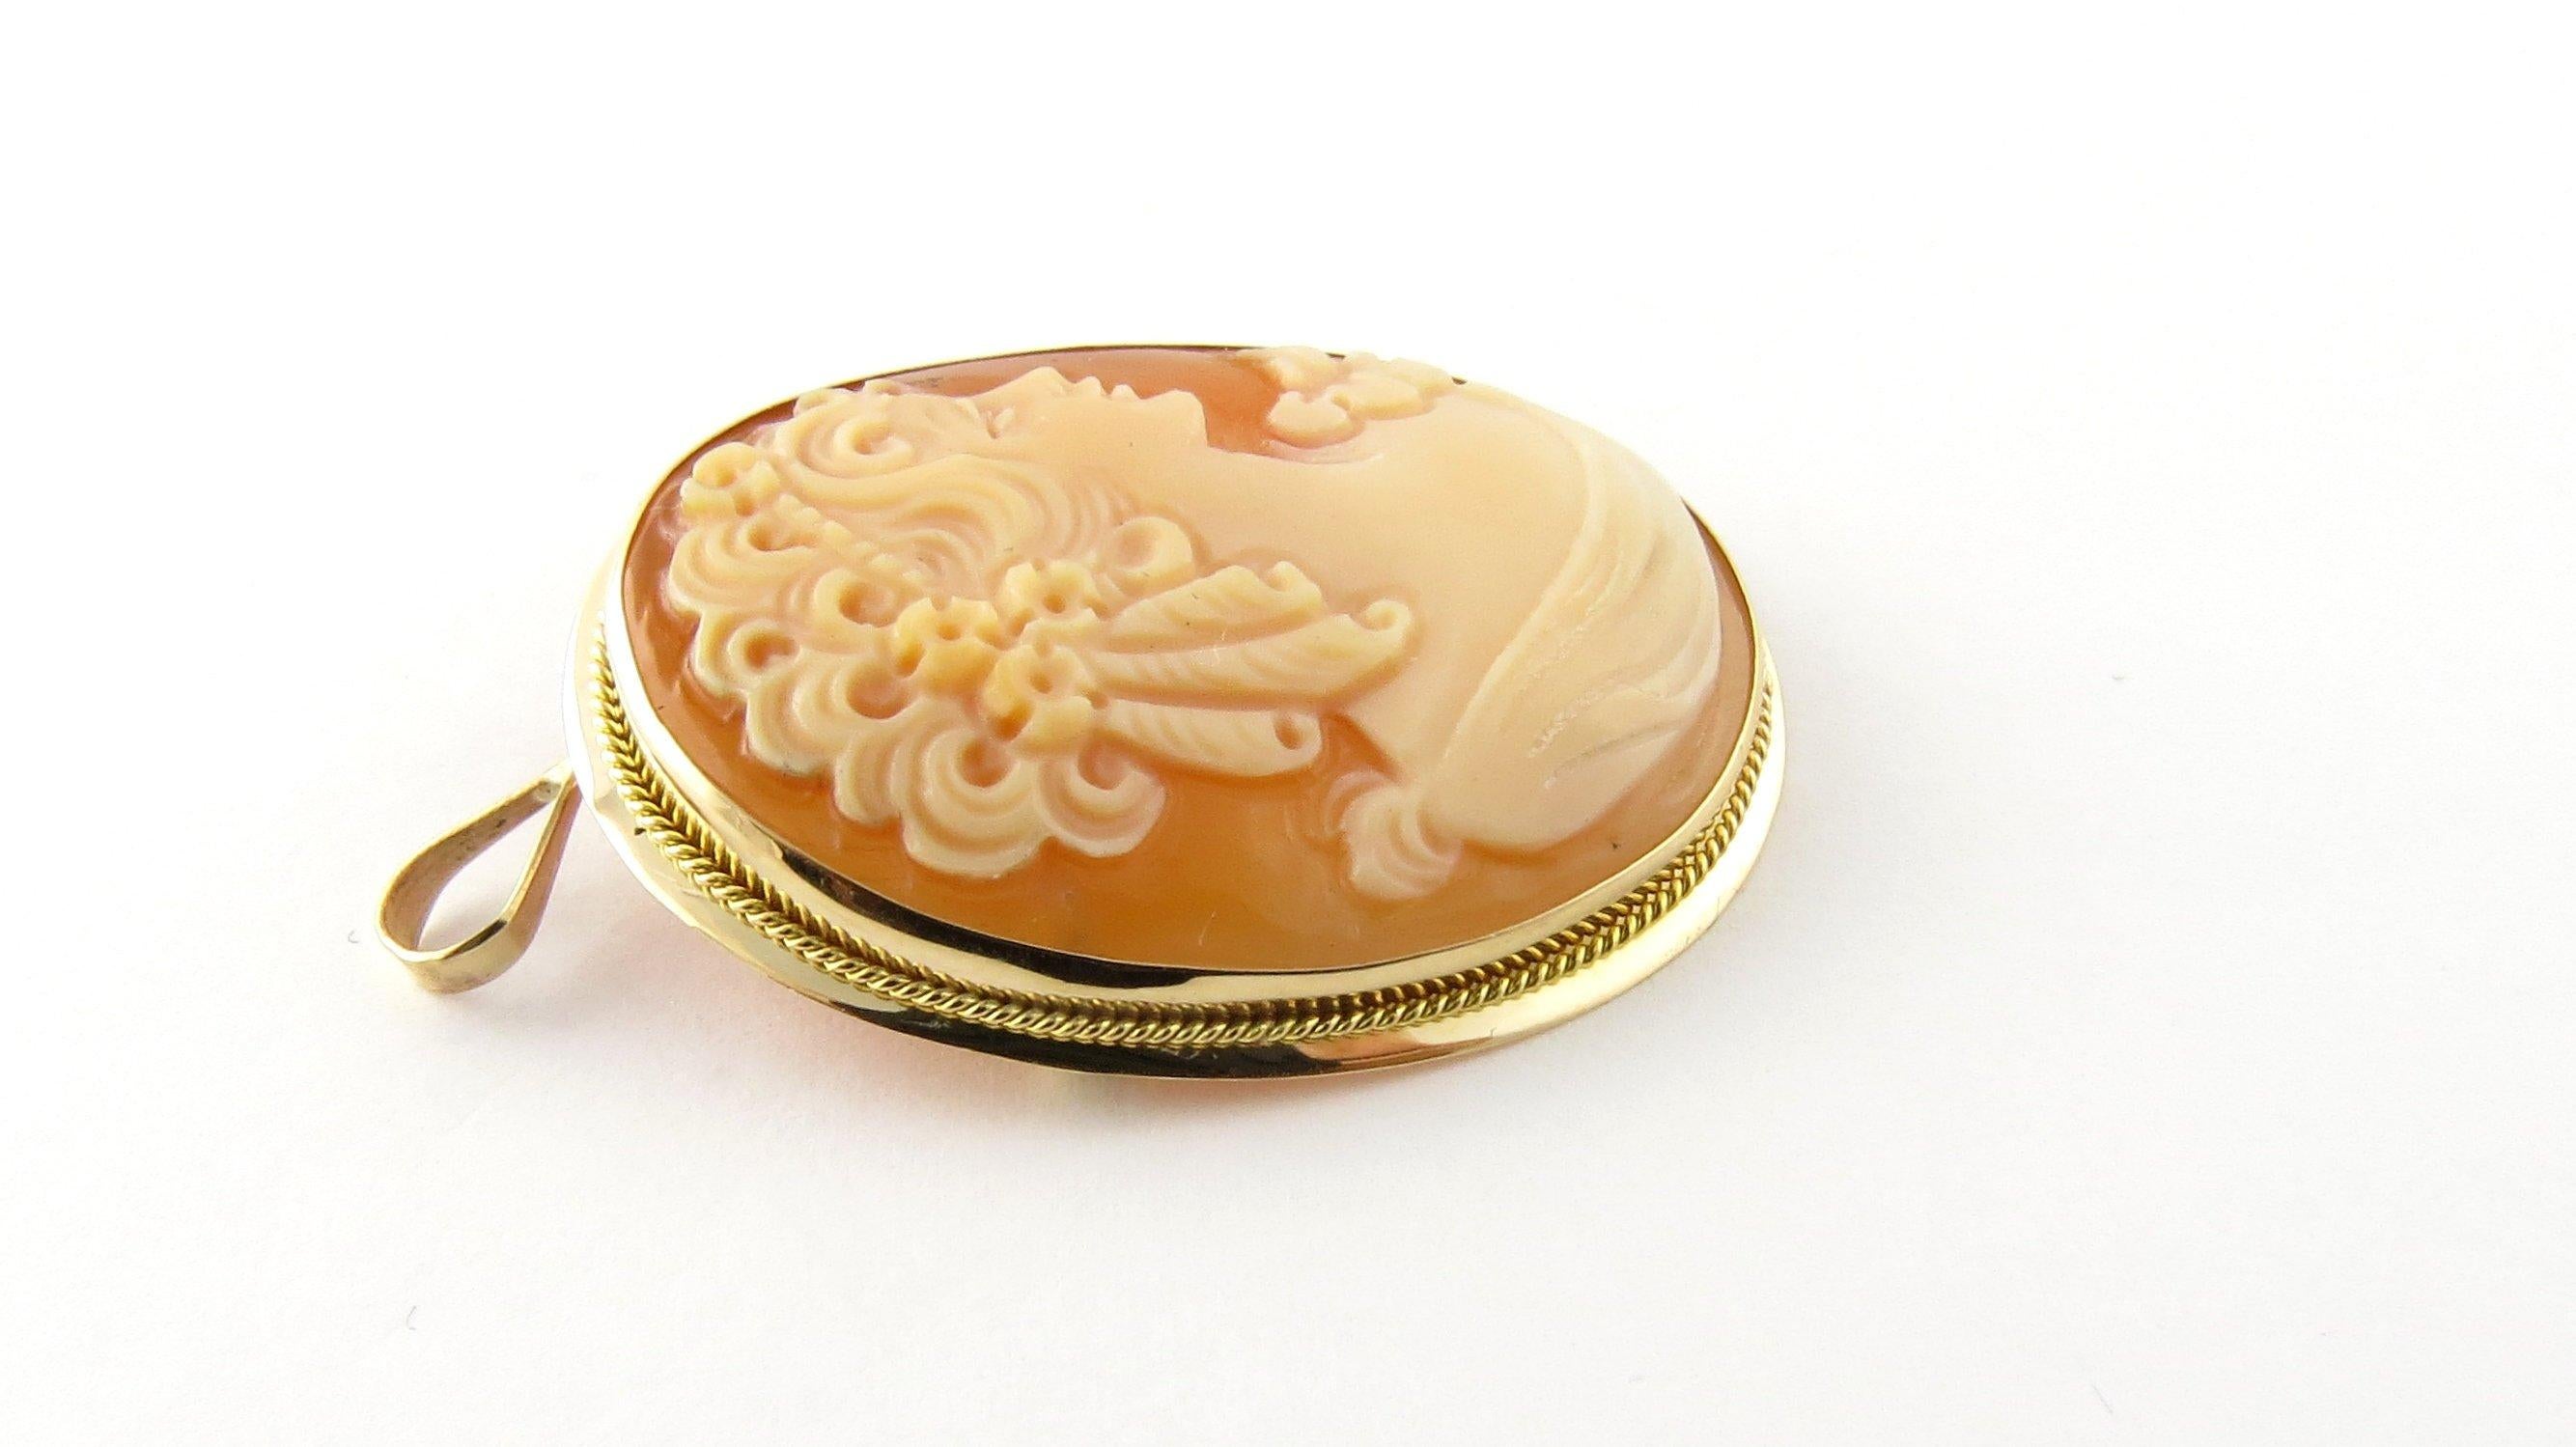 Vintage 14 Karat Yellow Gold Cameo Brooch/Pendant. This lovely cameo features a lovely lady in profile framed in beautifully detailed 14K yellow gold. Can be worn as a brooch or a pendant.
Size: 33 mm x 26 mm Weight: 2.5 dwt. / 4.0 gr. Stamped: 14K